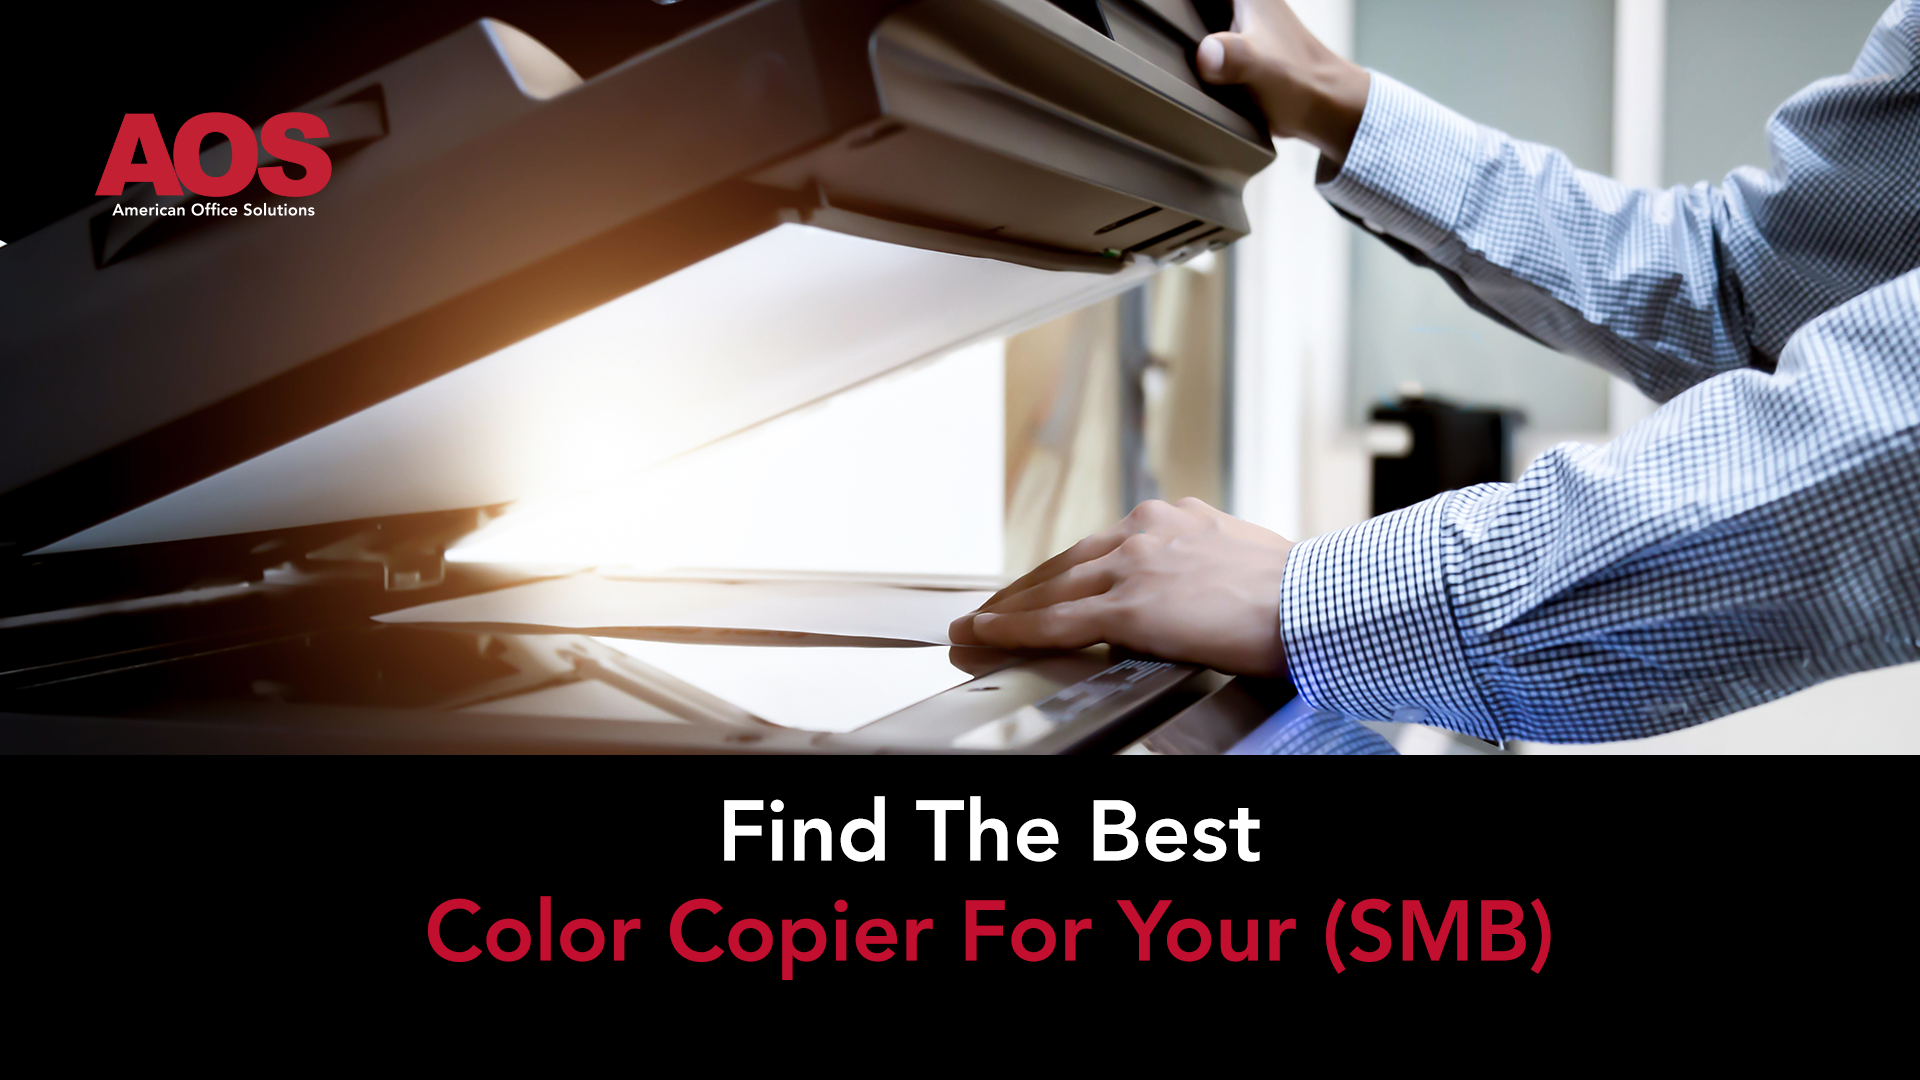 Find The Best Color Copier For Your Small Business (SMB)